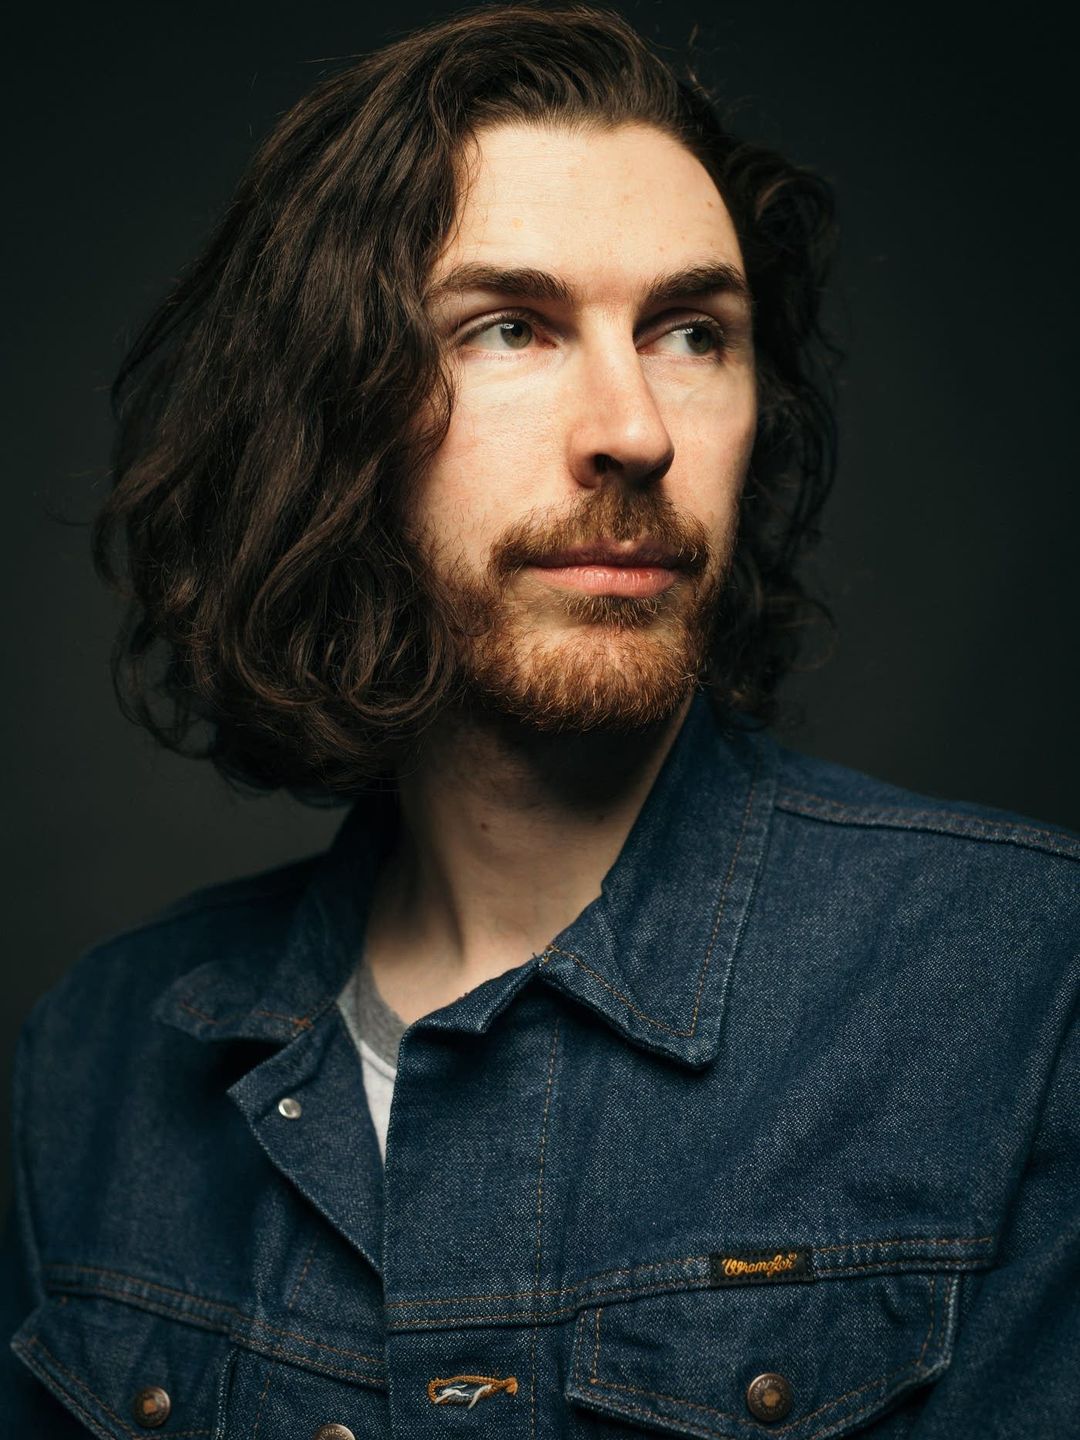 Hozier how did he became famous